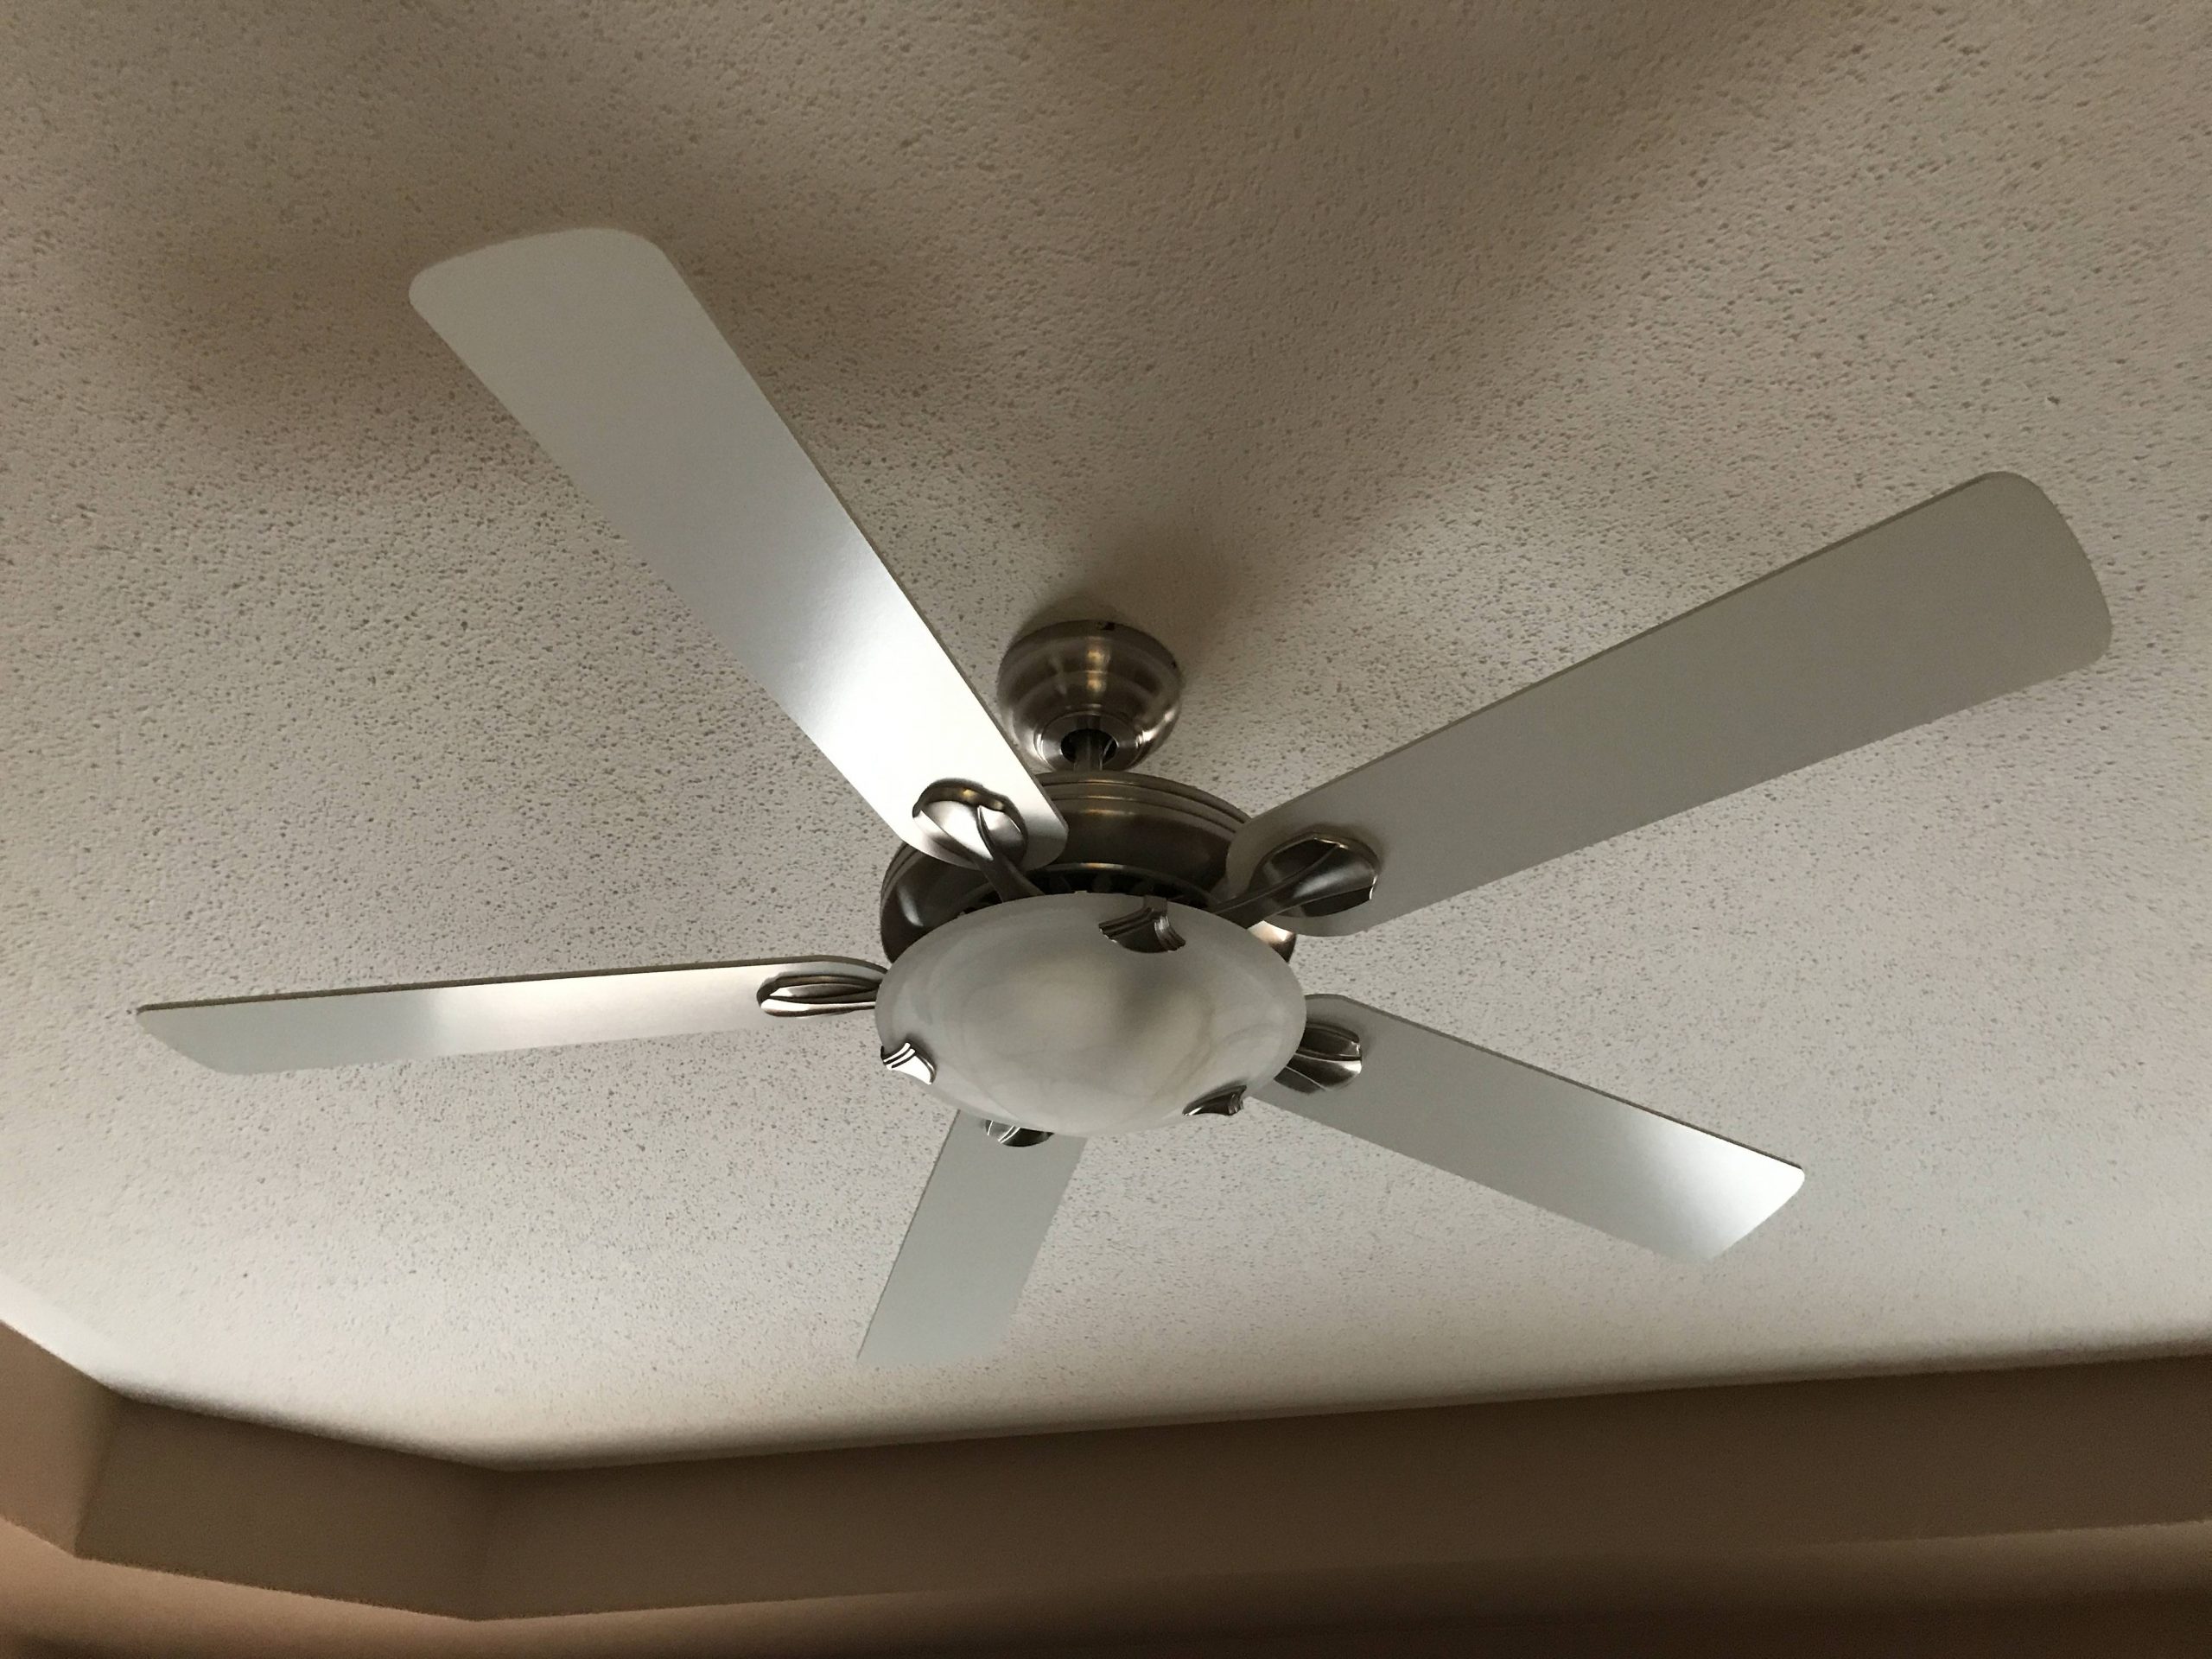 Ceiling Fan Needs Lightbulb E75795 Model Ac 552 The Home within dimensions 4032 X 3024